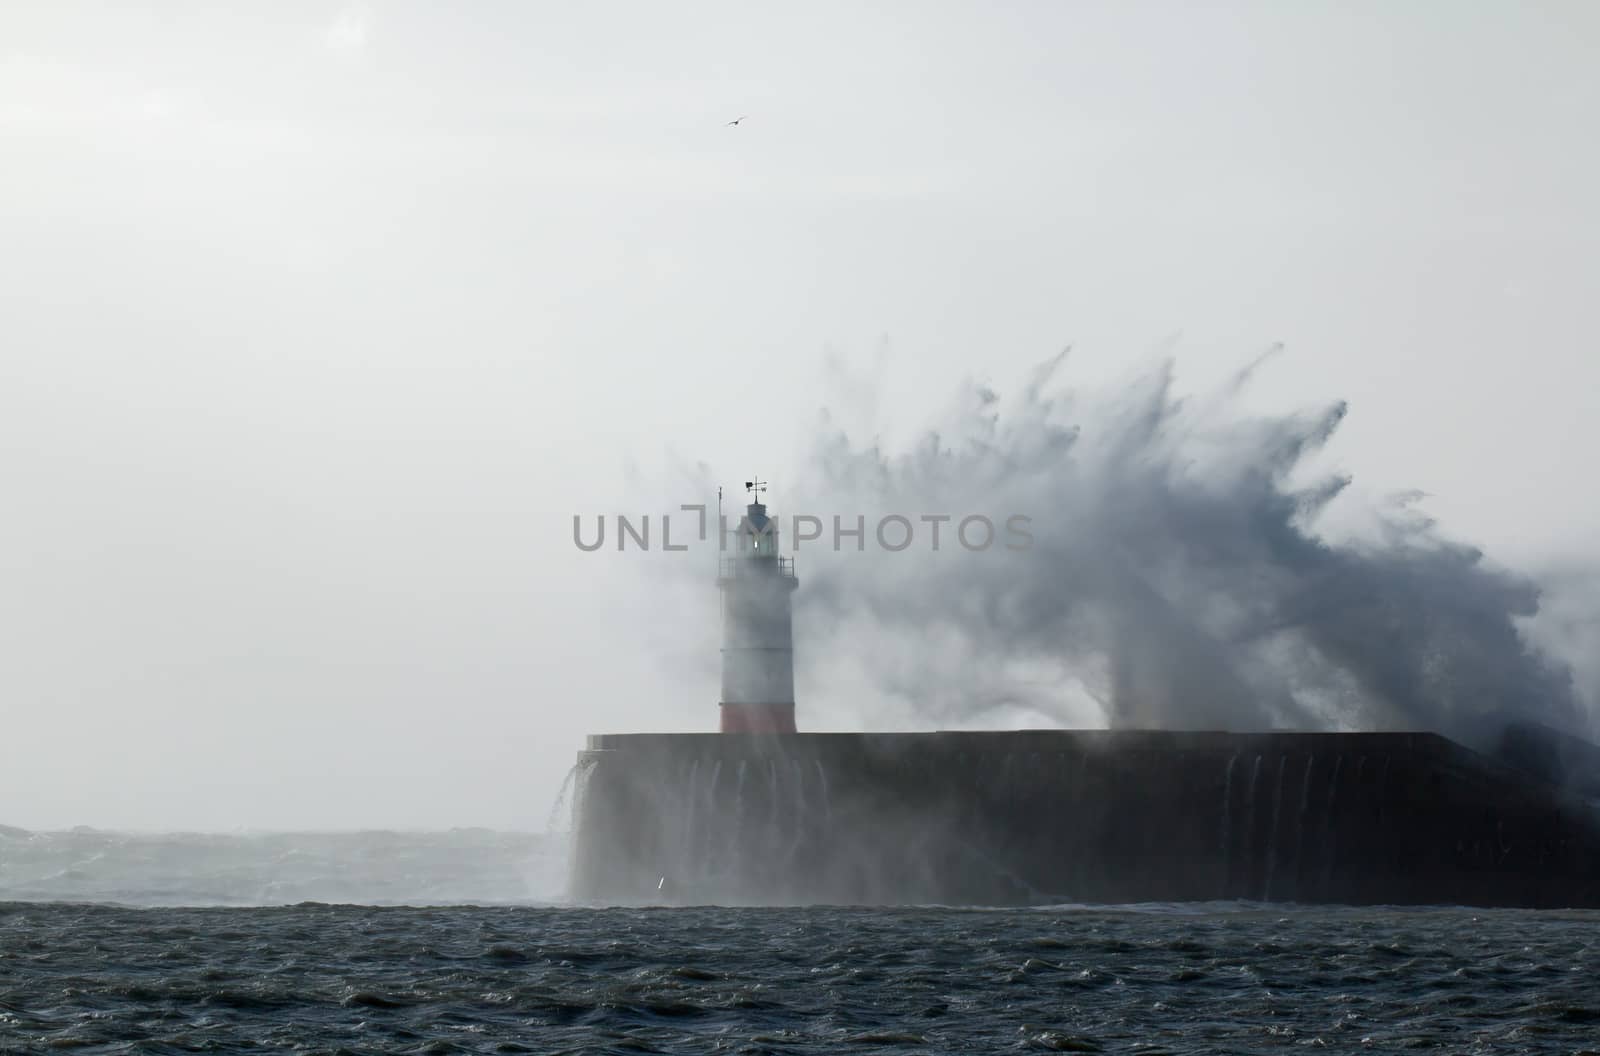 Newhaven Lighthouse in East Sussex, England, during Storm Doris in February 2017